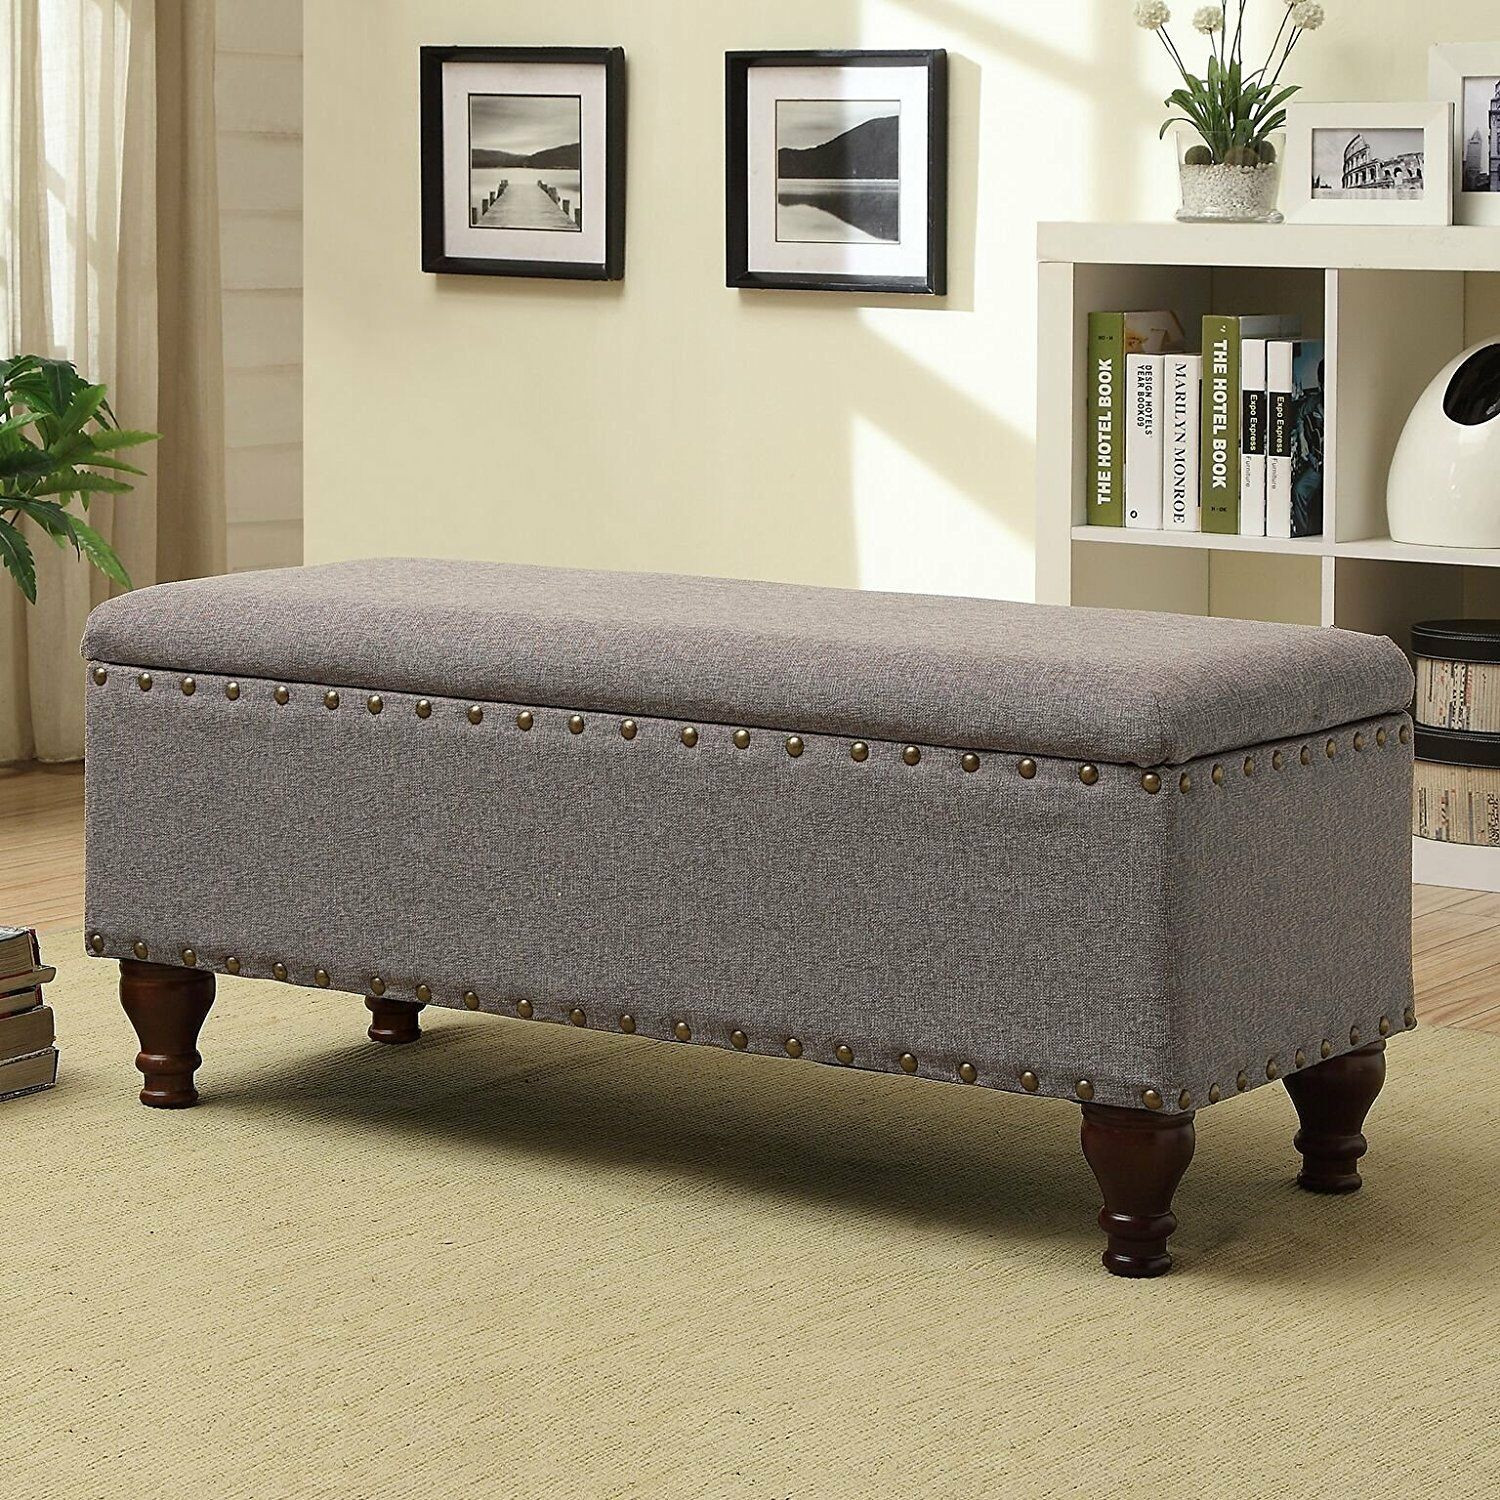 Bedroom Ottoman Storage Bench
 Storage Bench For Bedroom Nailhead Upholstered Ottoman